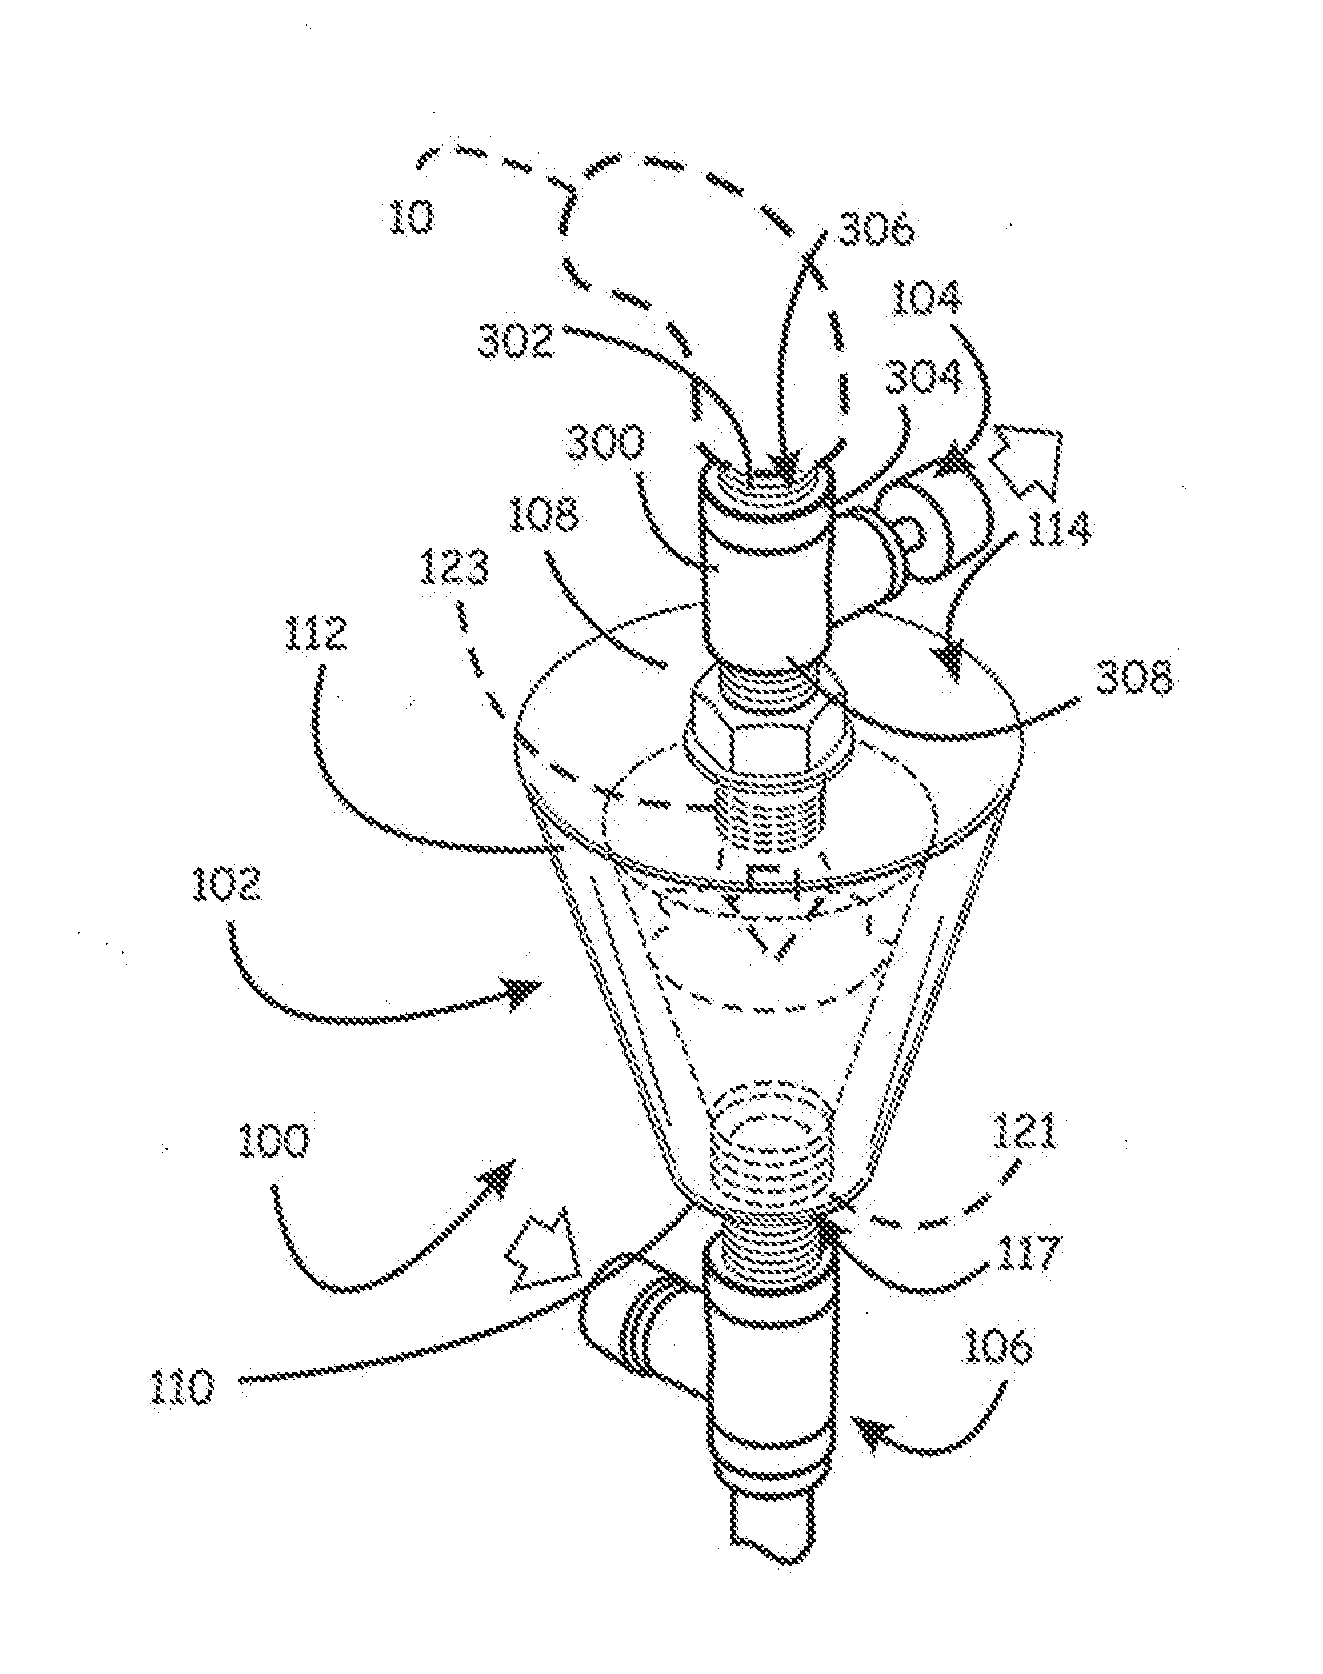 Drainable sight glass and associated methods